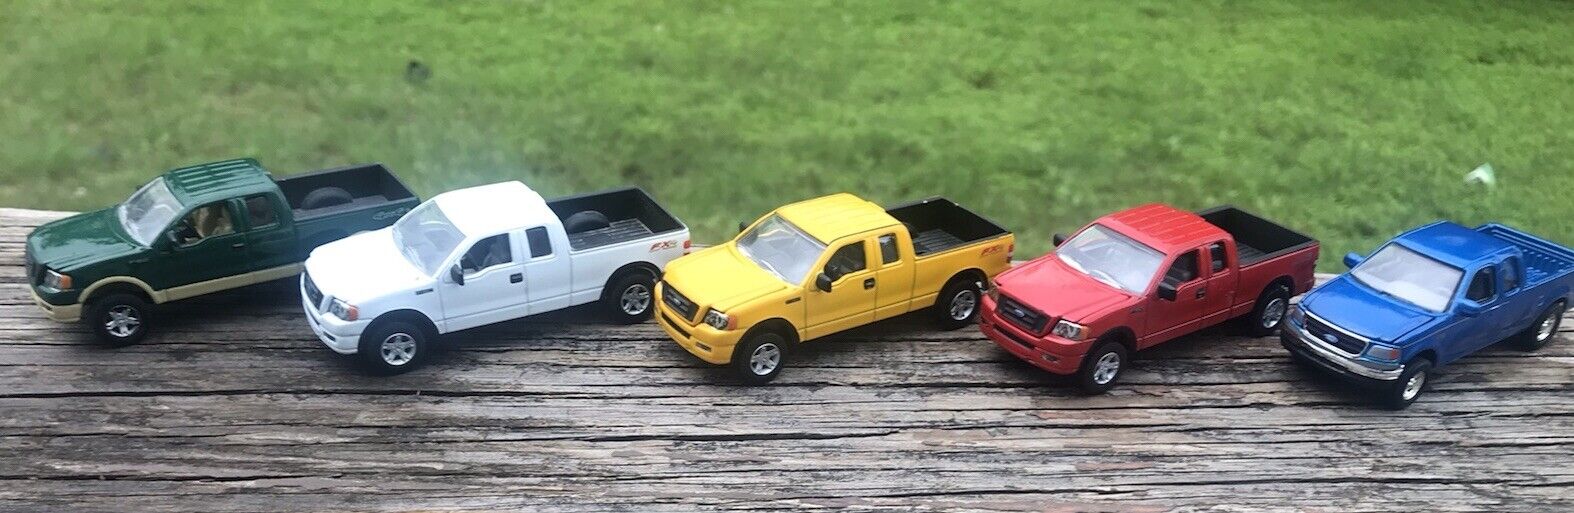 ERTL 1:64 Ford F-150 Lot with Blue Revell F-150